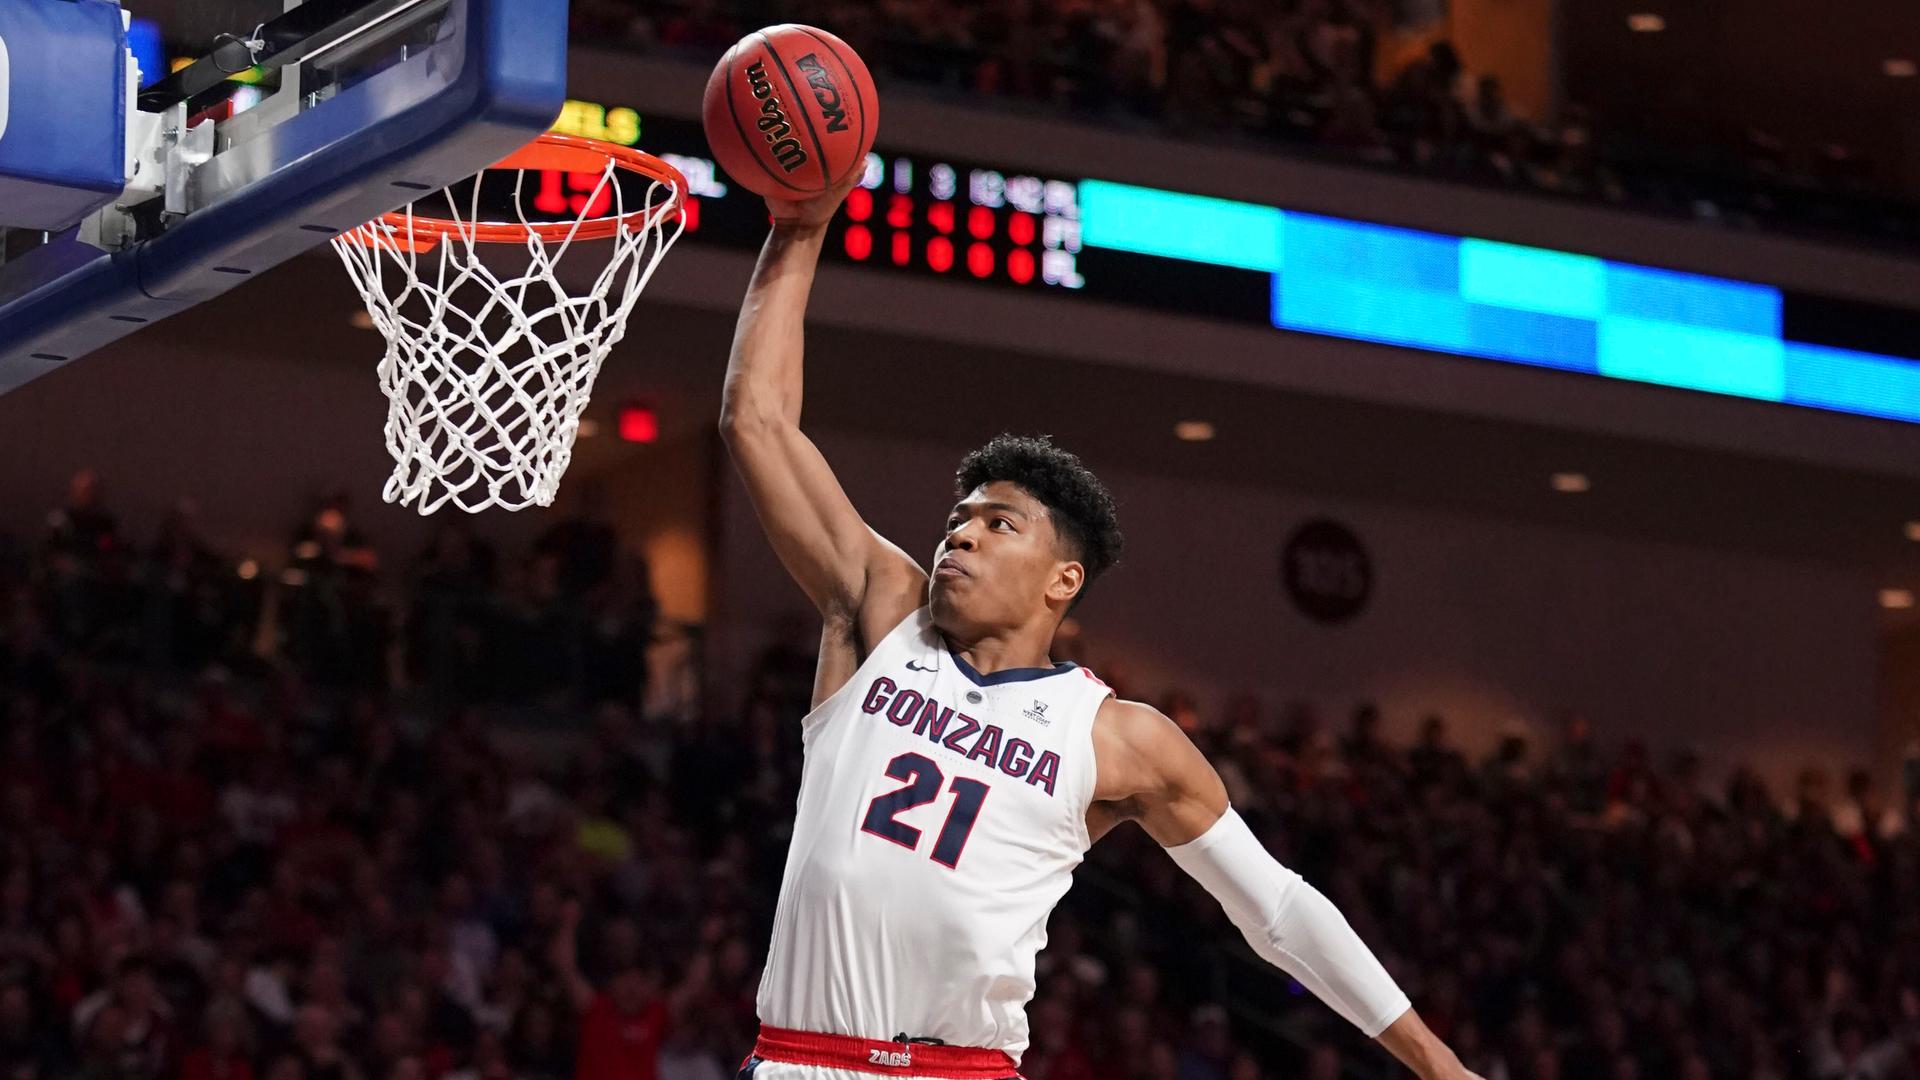 Gonzaga forward Rui Hachimura dunks the basketball against Saint Mary's during the first half in the finals of the WCC Basketball Championships in Las Vegas, March 12, 2019.